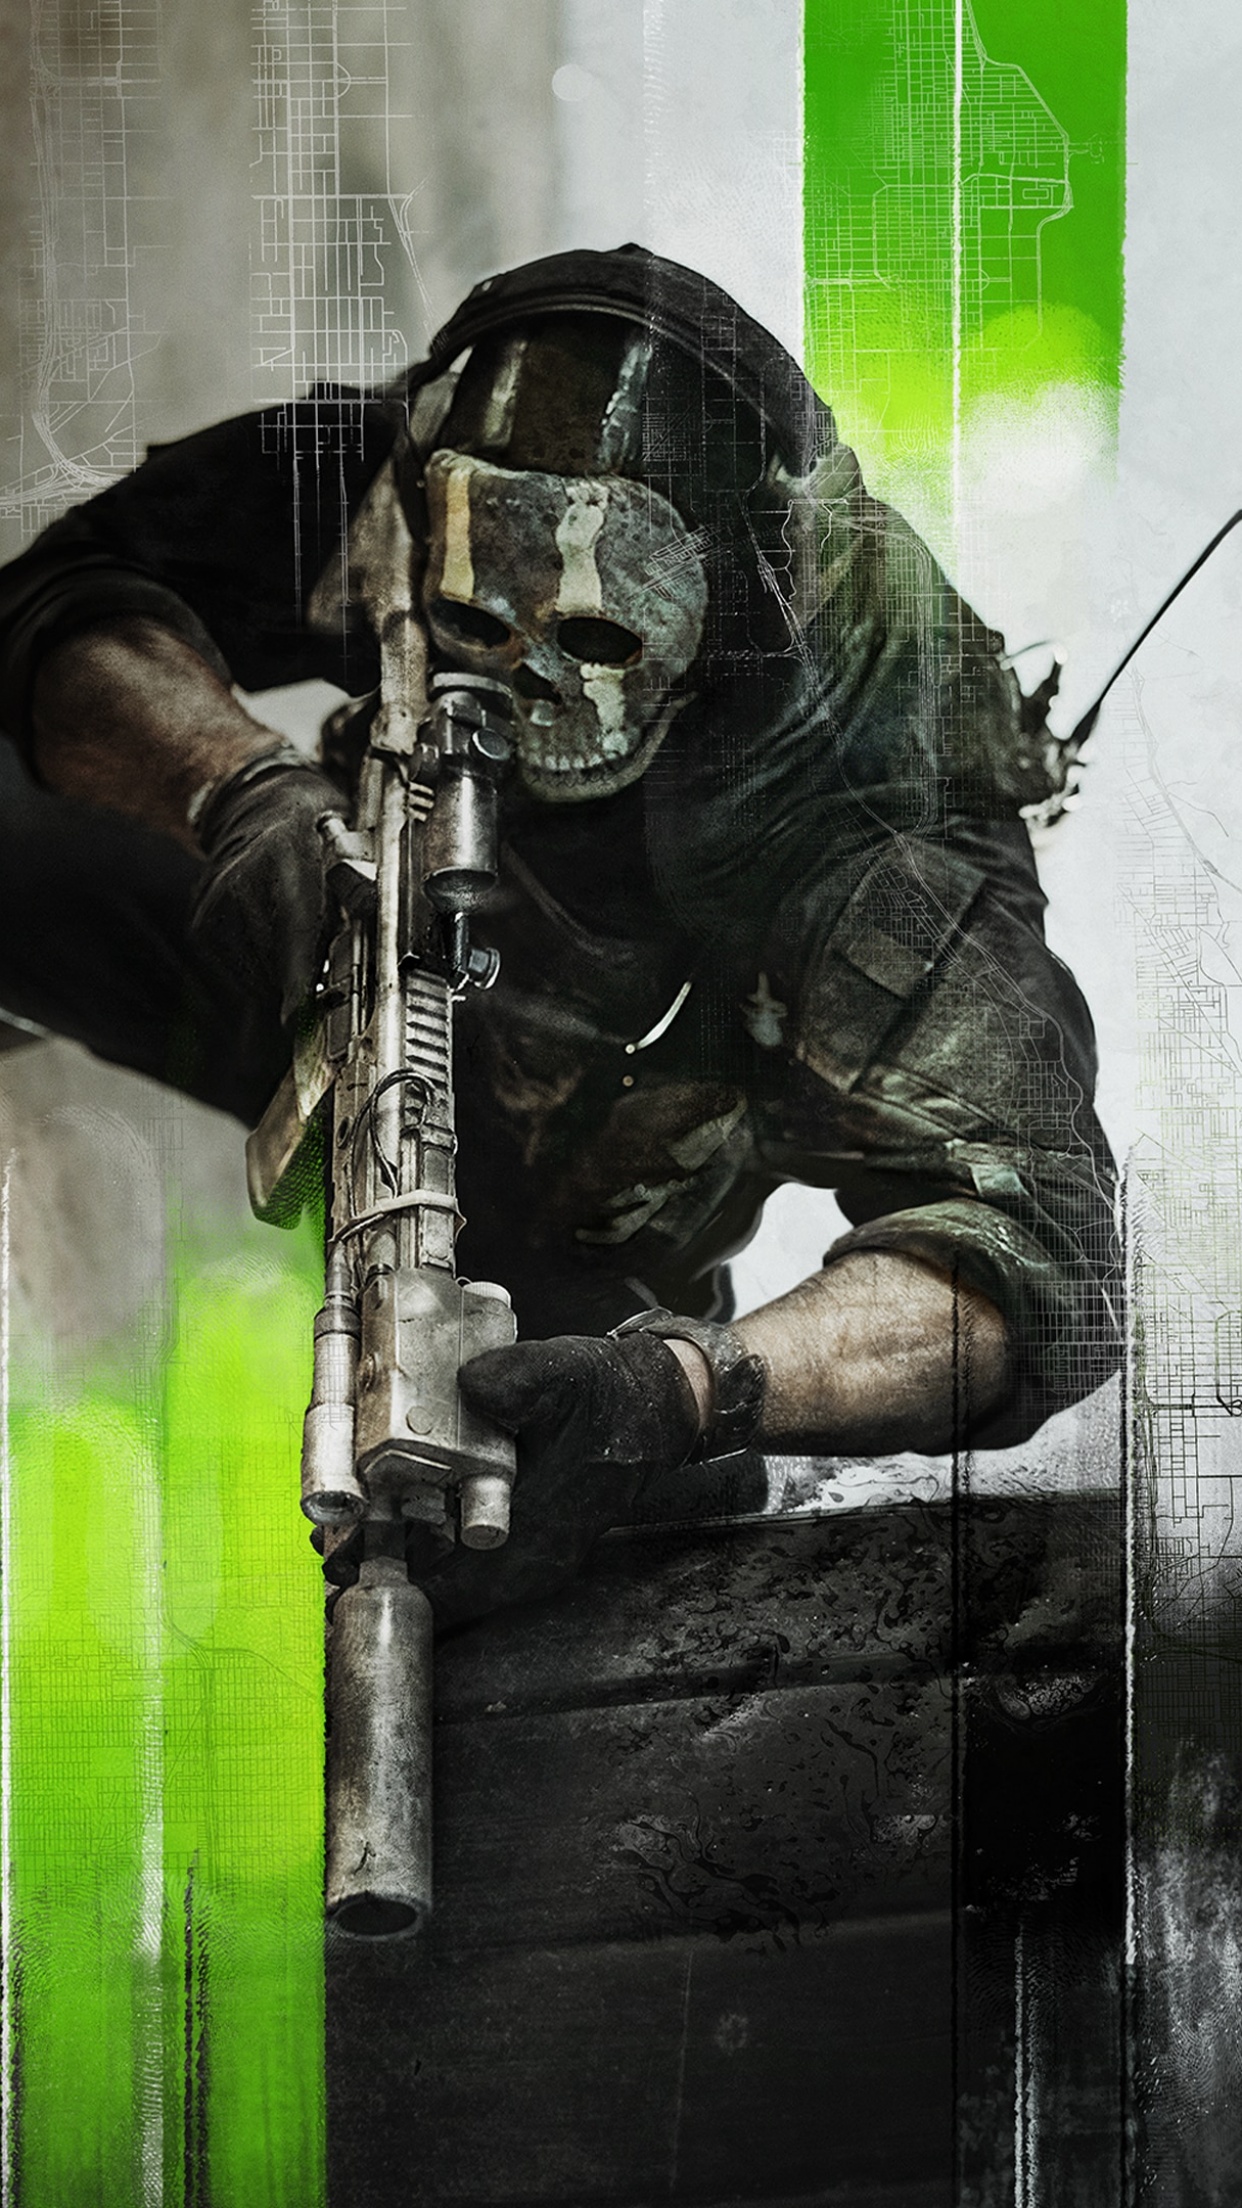 call of duty ghosts iphone 4 wallpaper